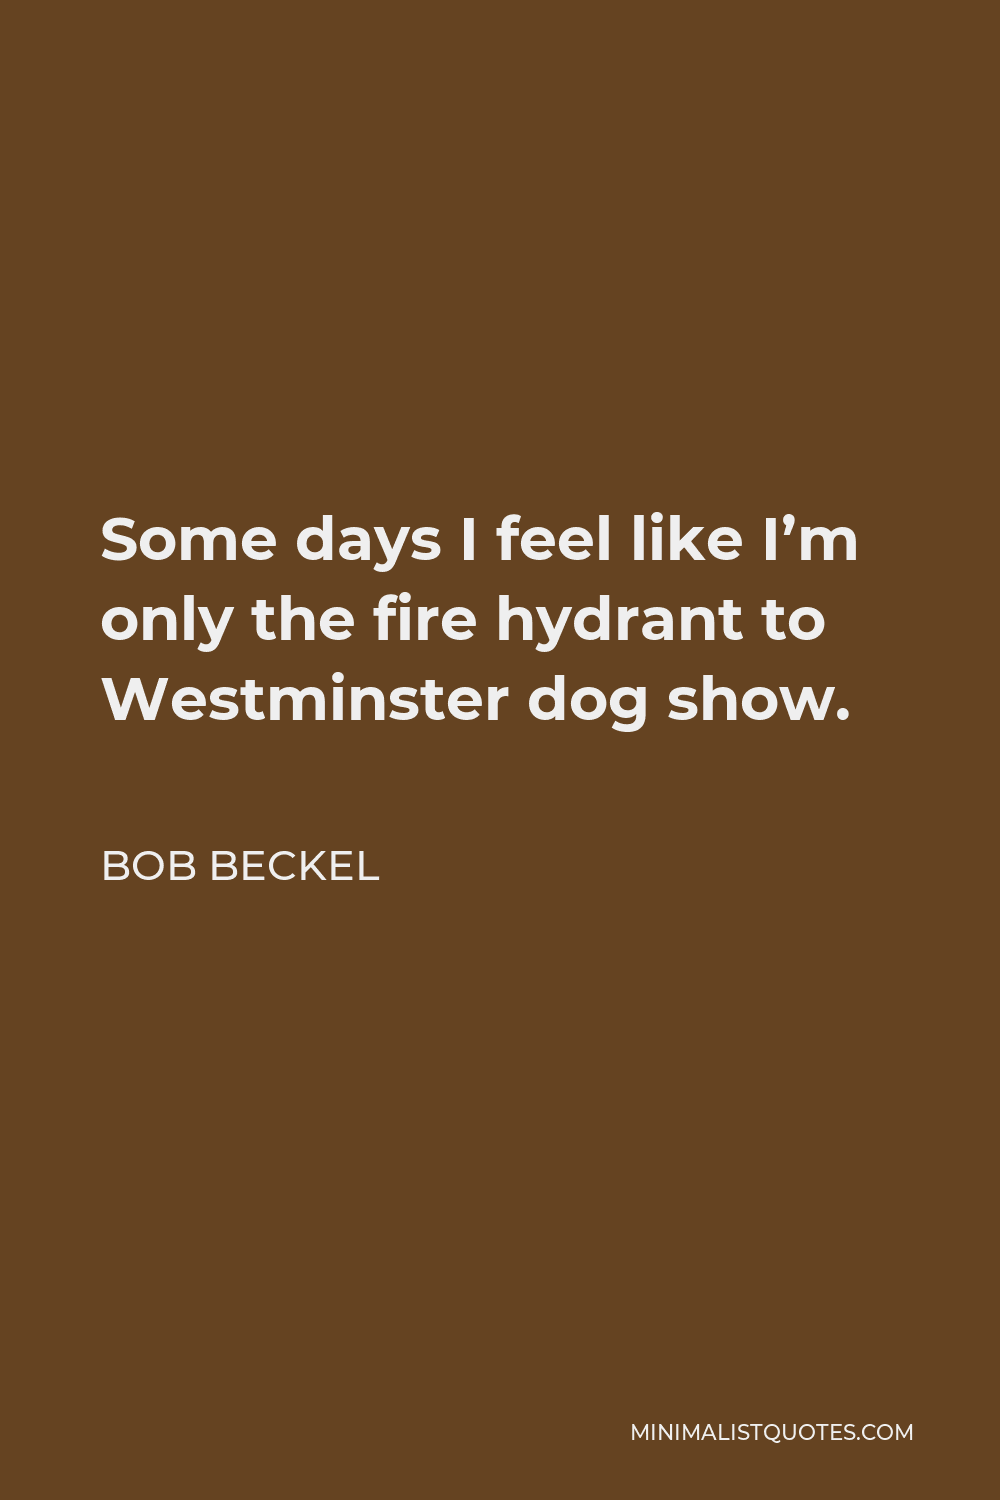 Bob Beckel Quote - Some days I feel like I’m only the fire hydrant to Westminster dog show.